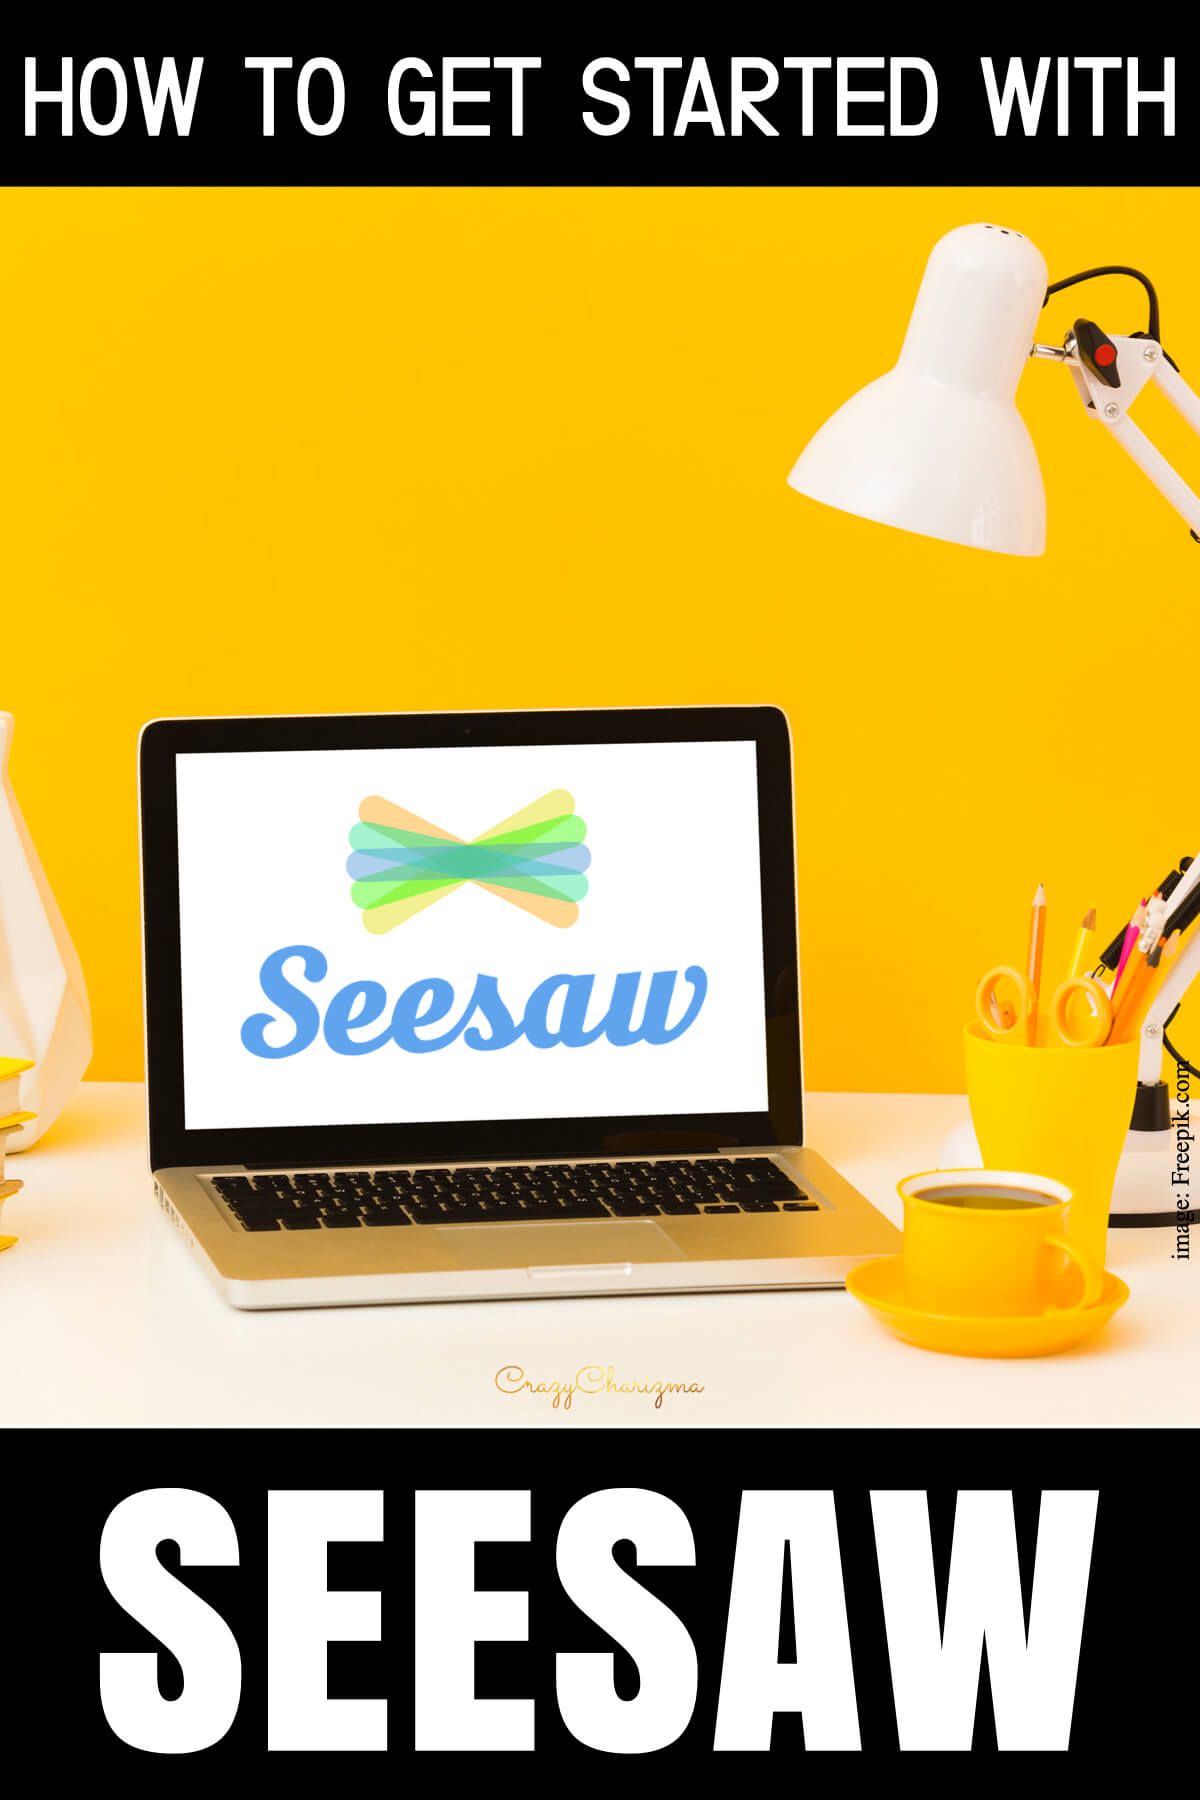 Need to get started with Seesaw? Check out this Seesaw tutorial. Together we'll learn all the basics about Seesaw!